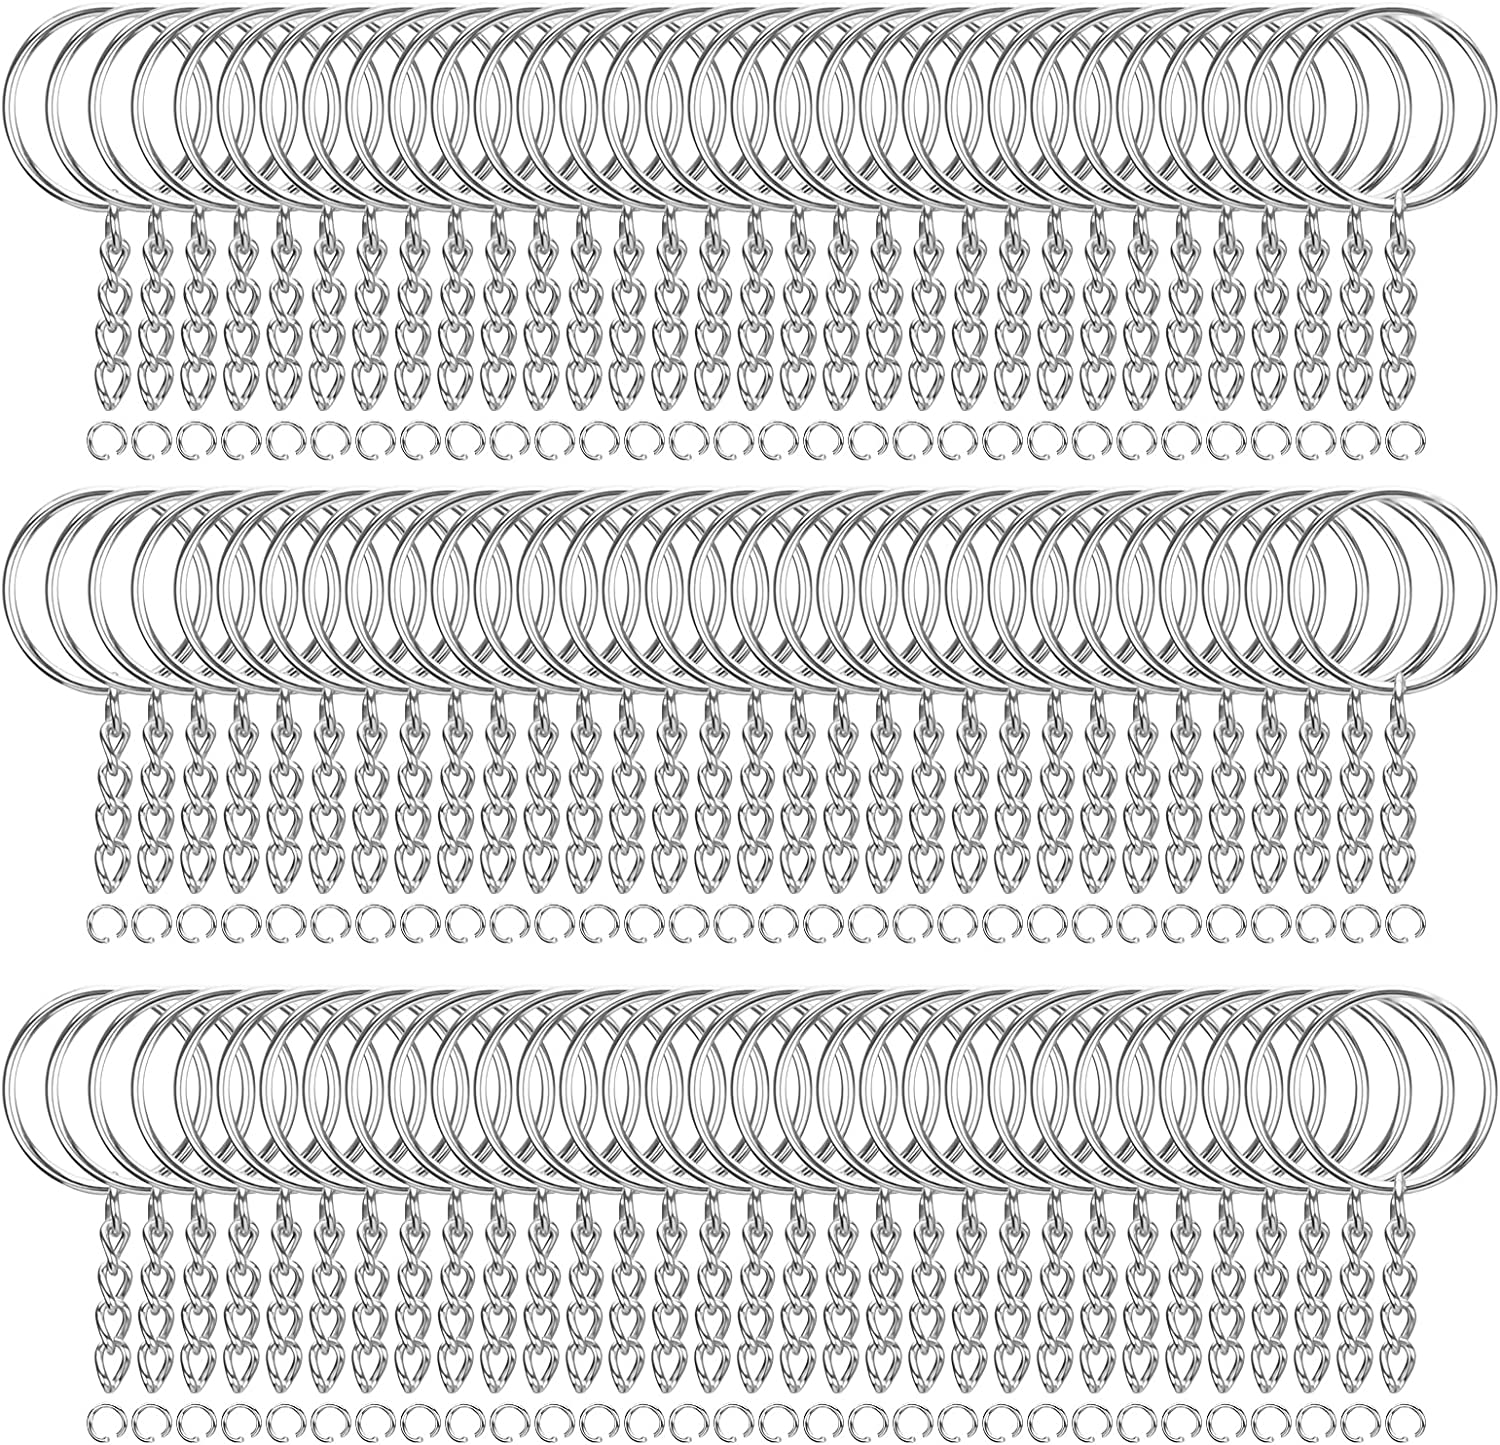 Suuchh 100pcs Keychain Rings with Chain and Jump Rings, 1 inch Split Key Ring with Chain Heavy-Duty Keychain Rings Bulk for Craft Making Jewelry